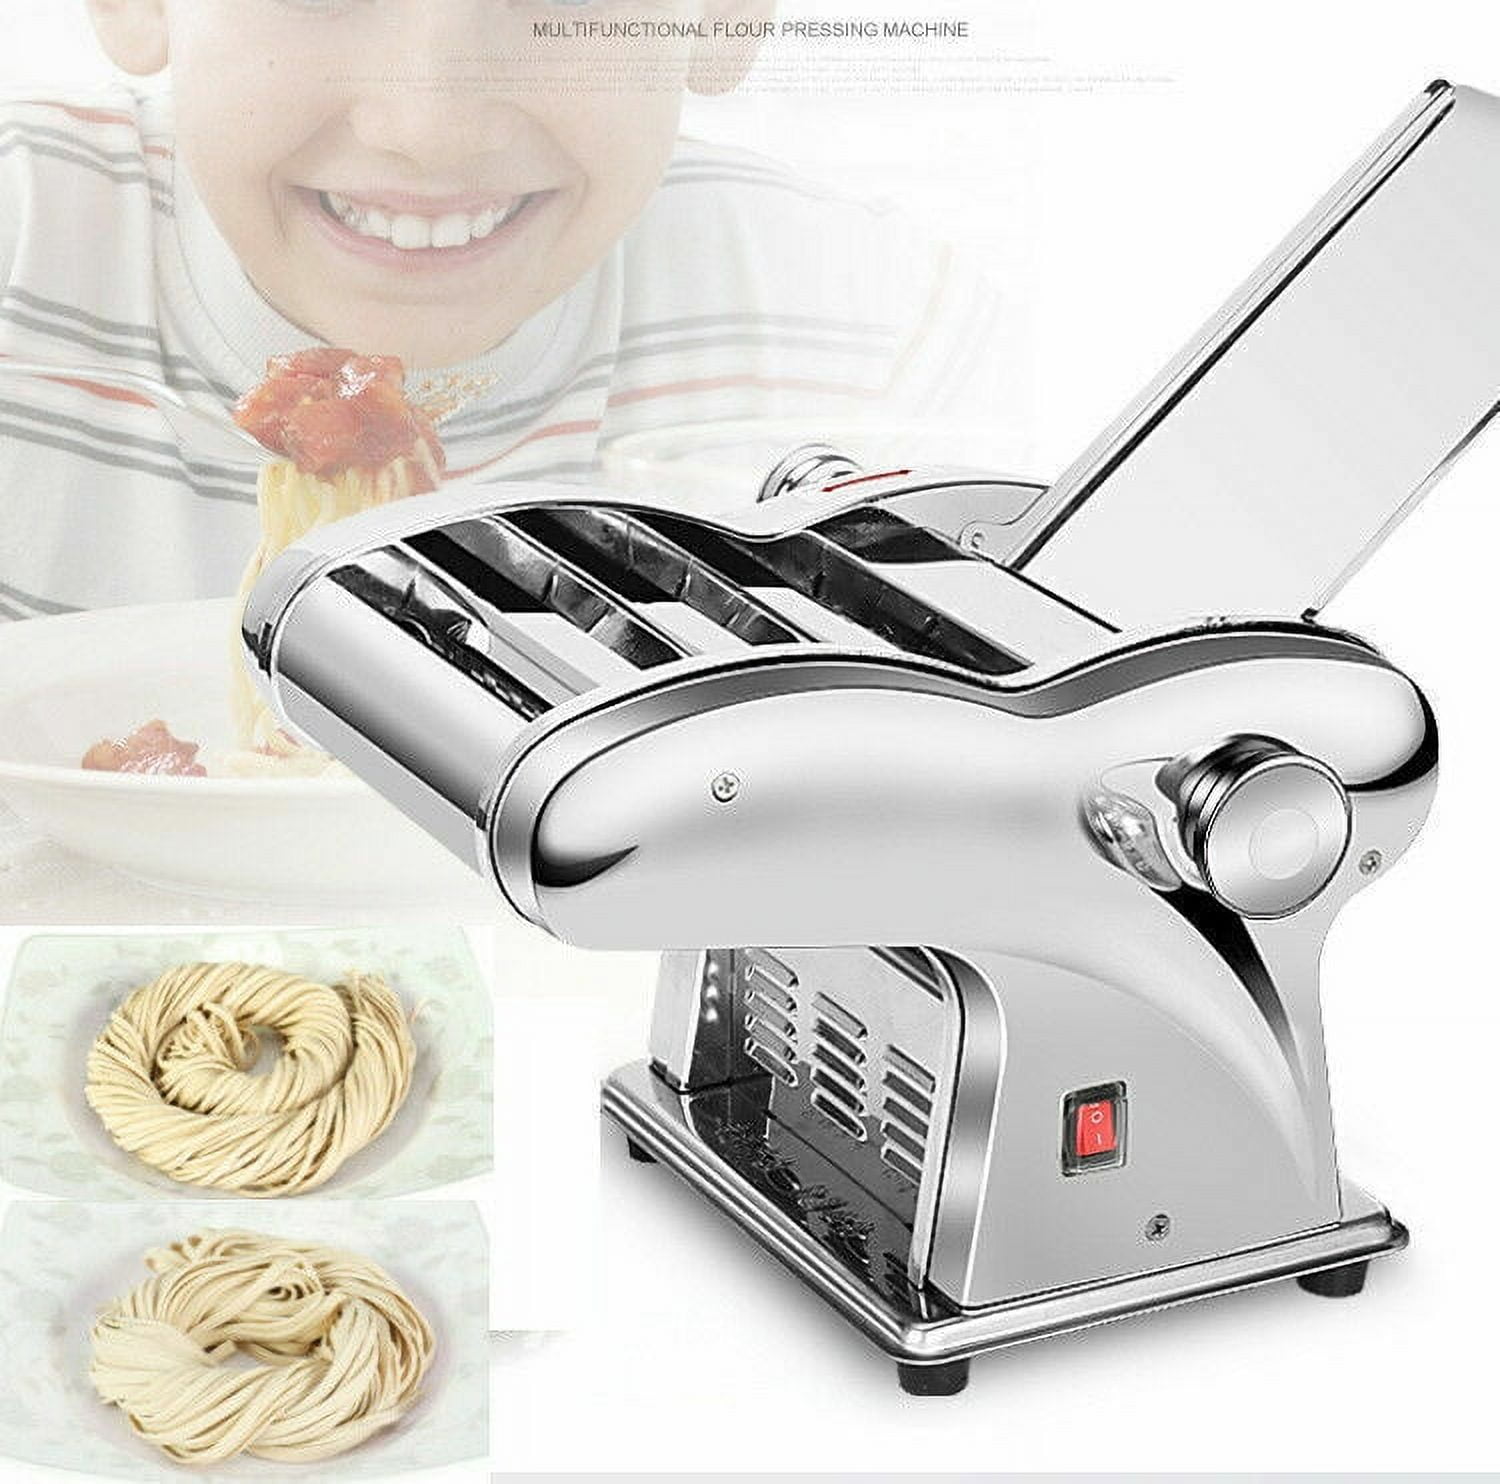 Topchances 550W Electric Pasta Maker, Automatic Noodle Machine, 2-in-1 Heavy Duty Stainless Steel Dough Roller Pressing Machine (Noodle Width: 3mm/9mm